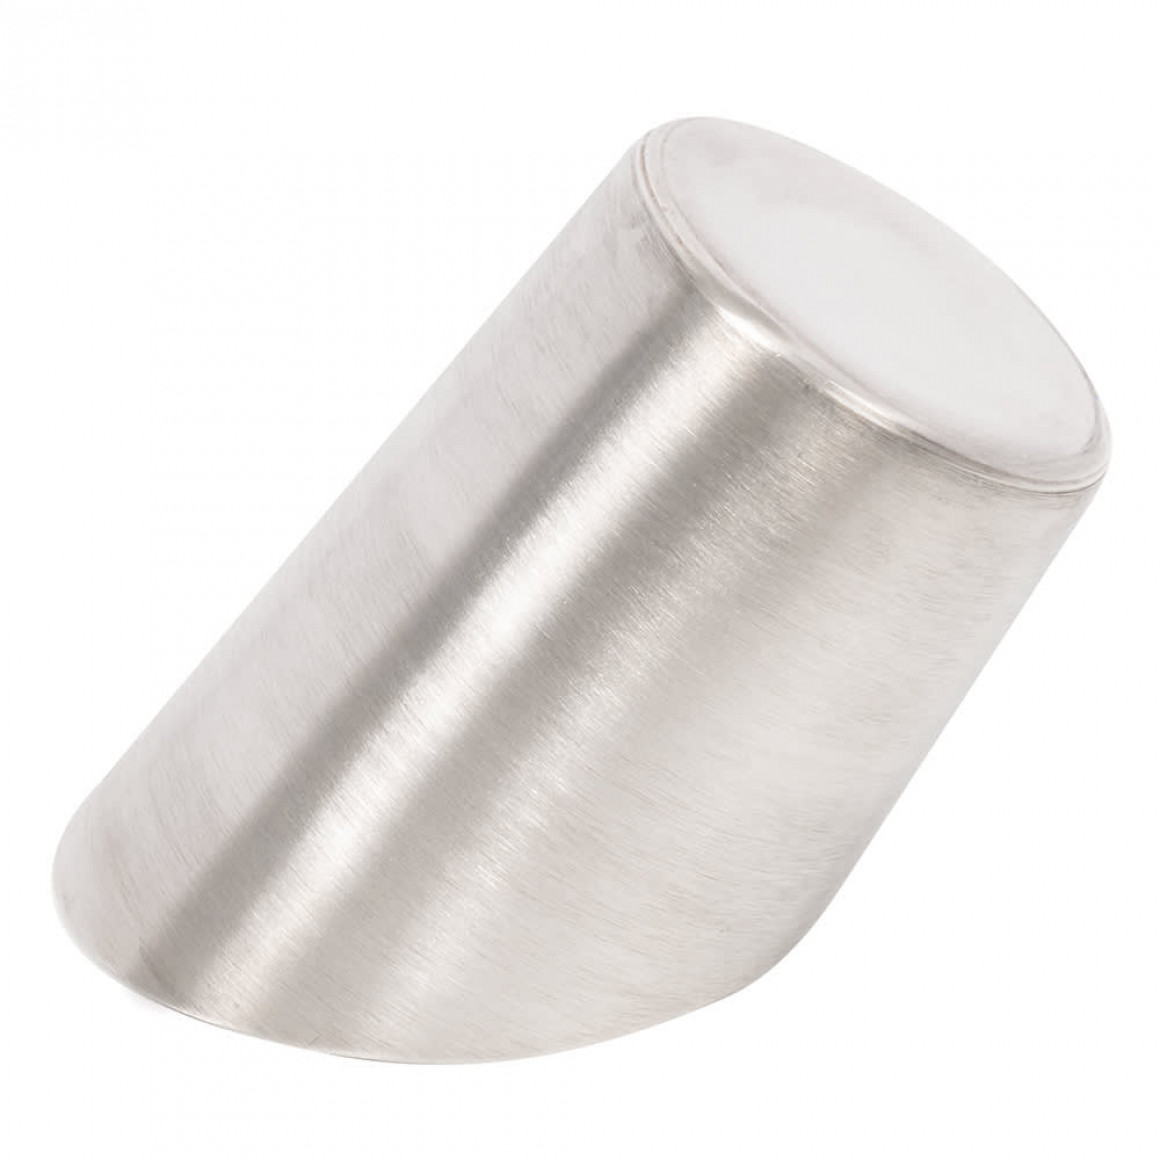 STAINLESS STEEL FRY CUP, SATIN, ANGLED, 12 OZ.